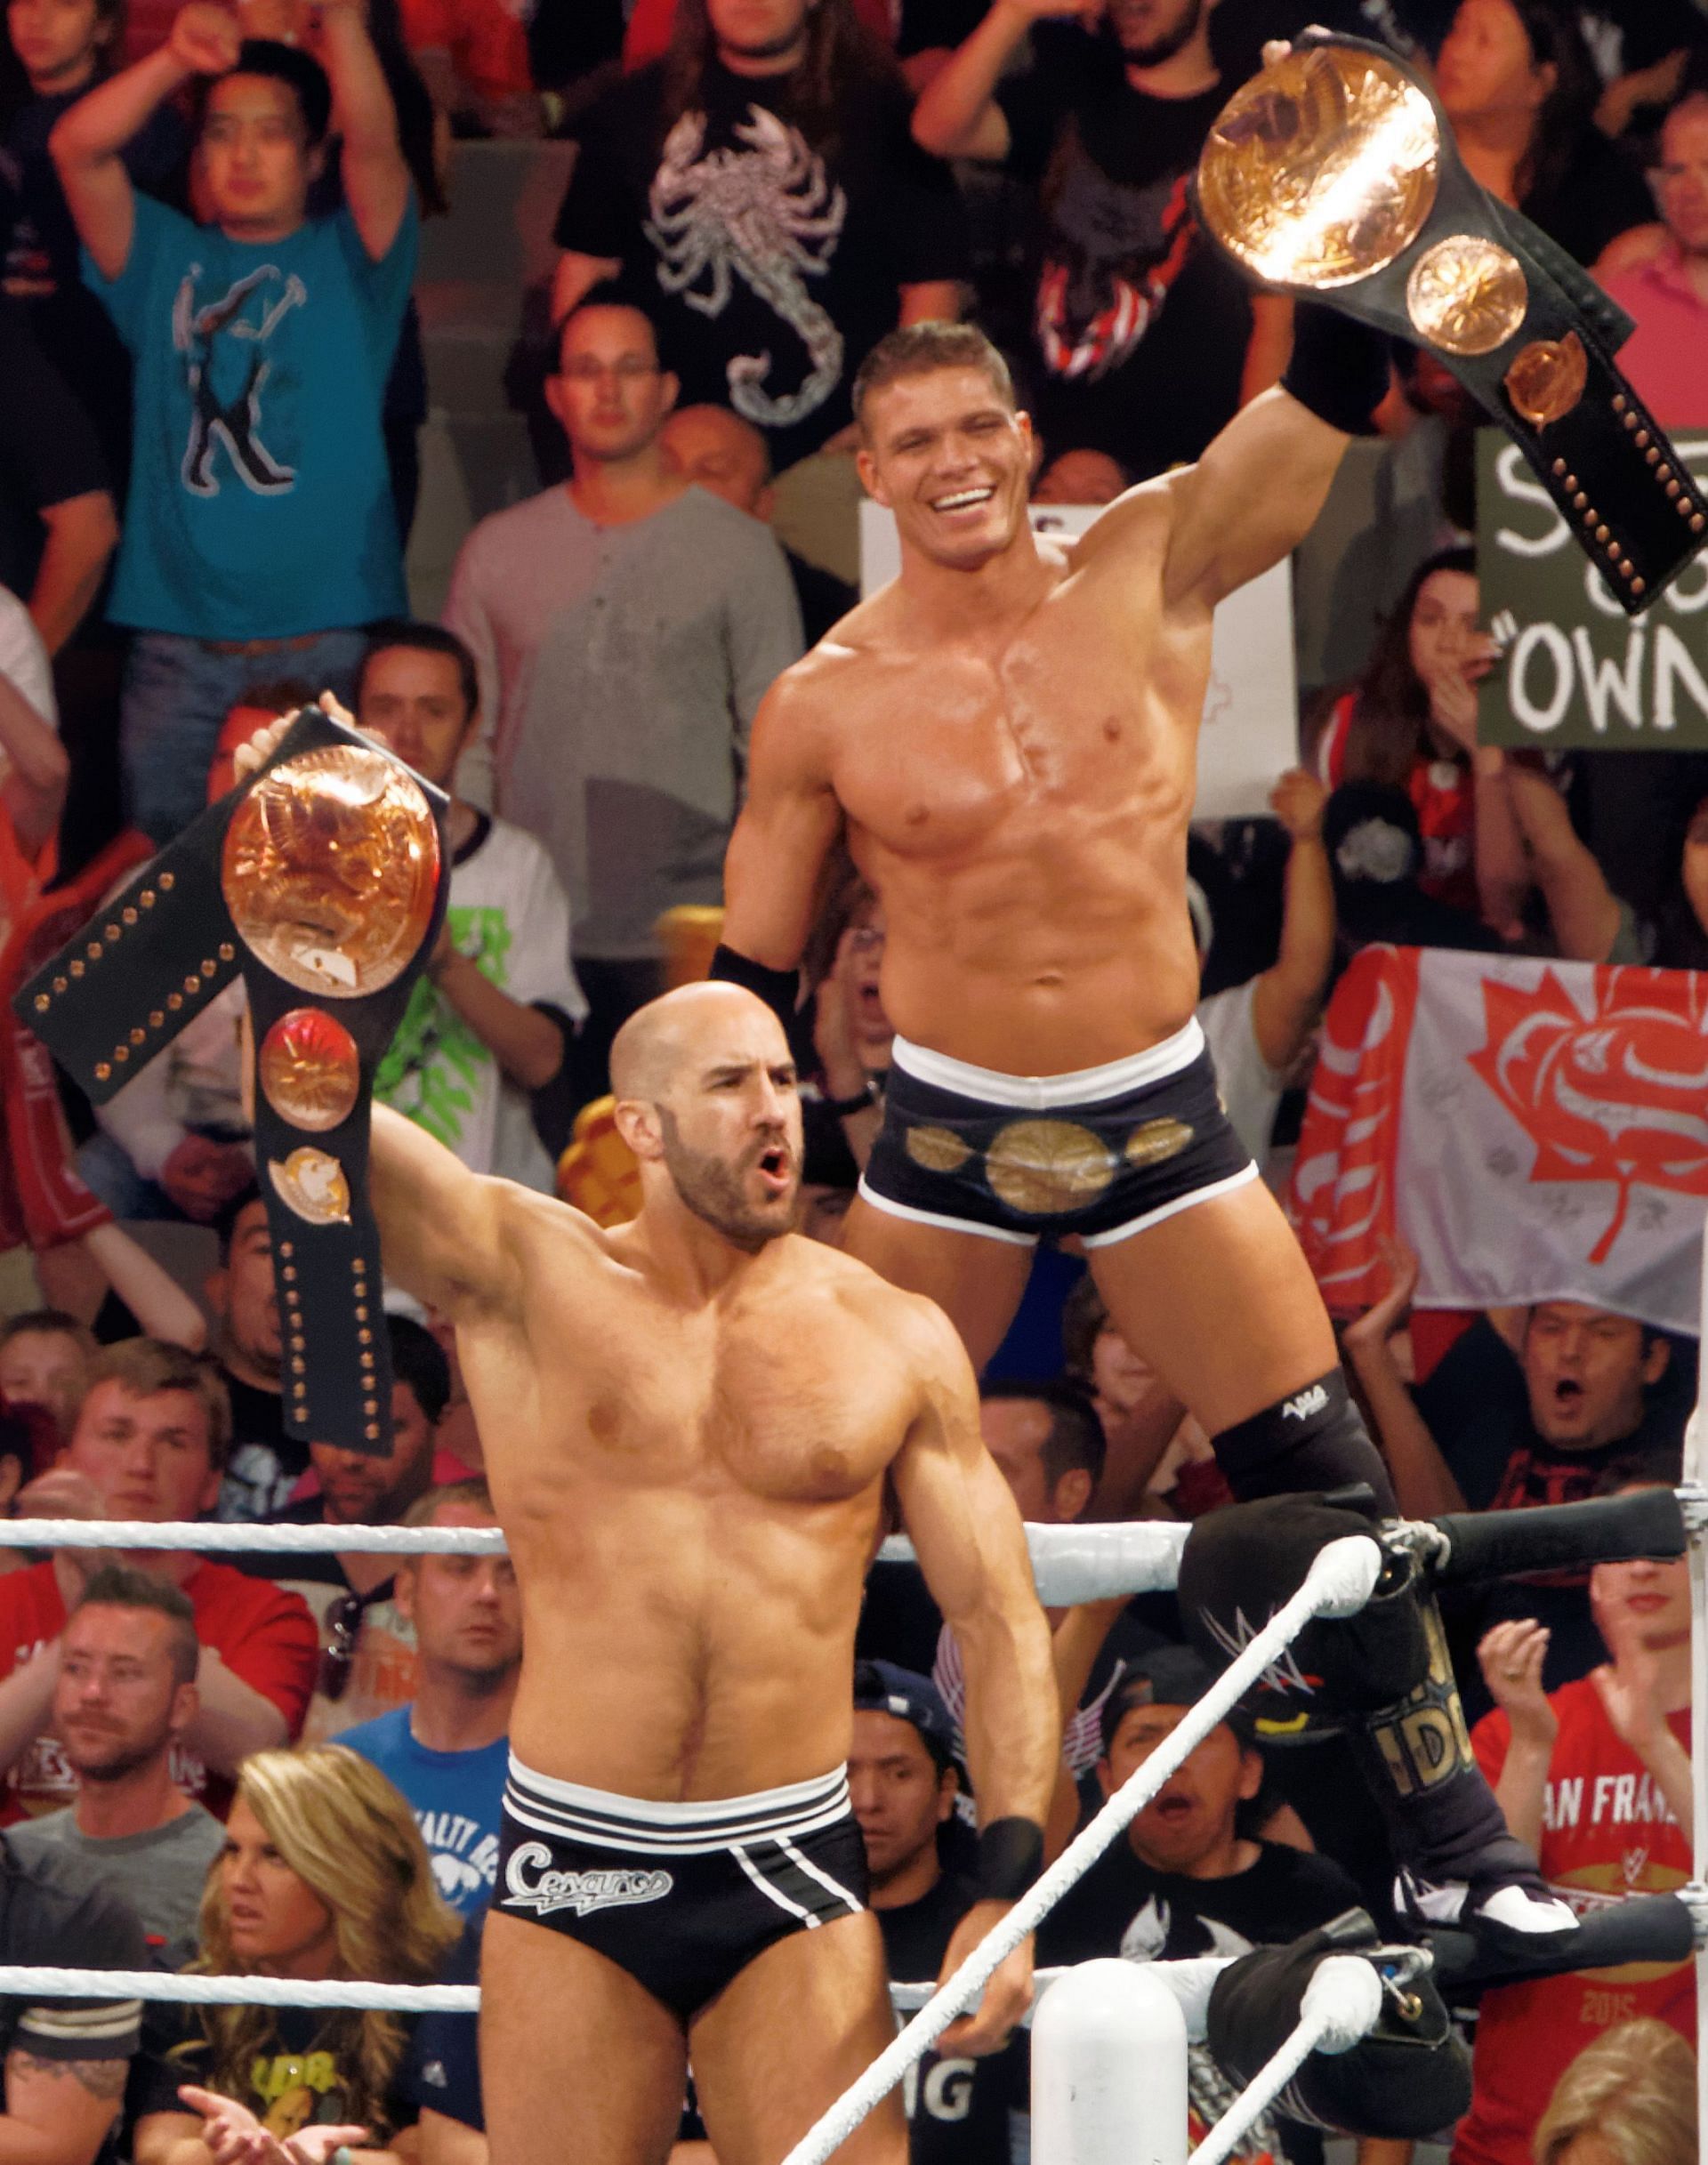 Tyson Kidd and Cesaro as Tag Team Champions